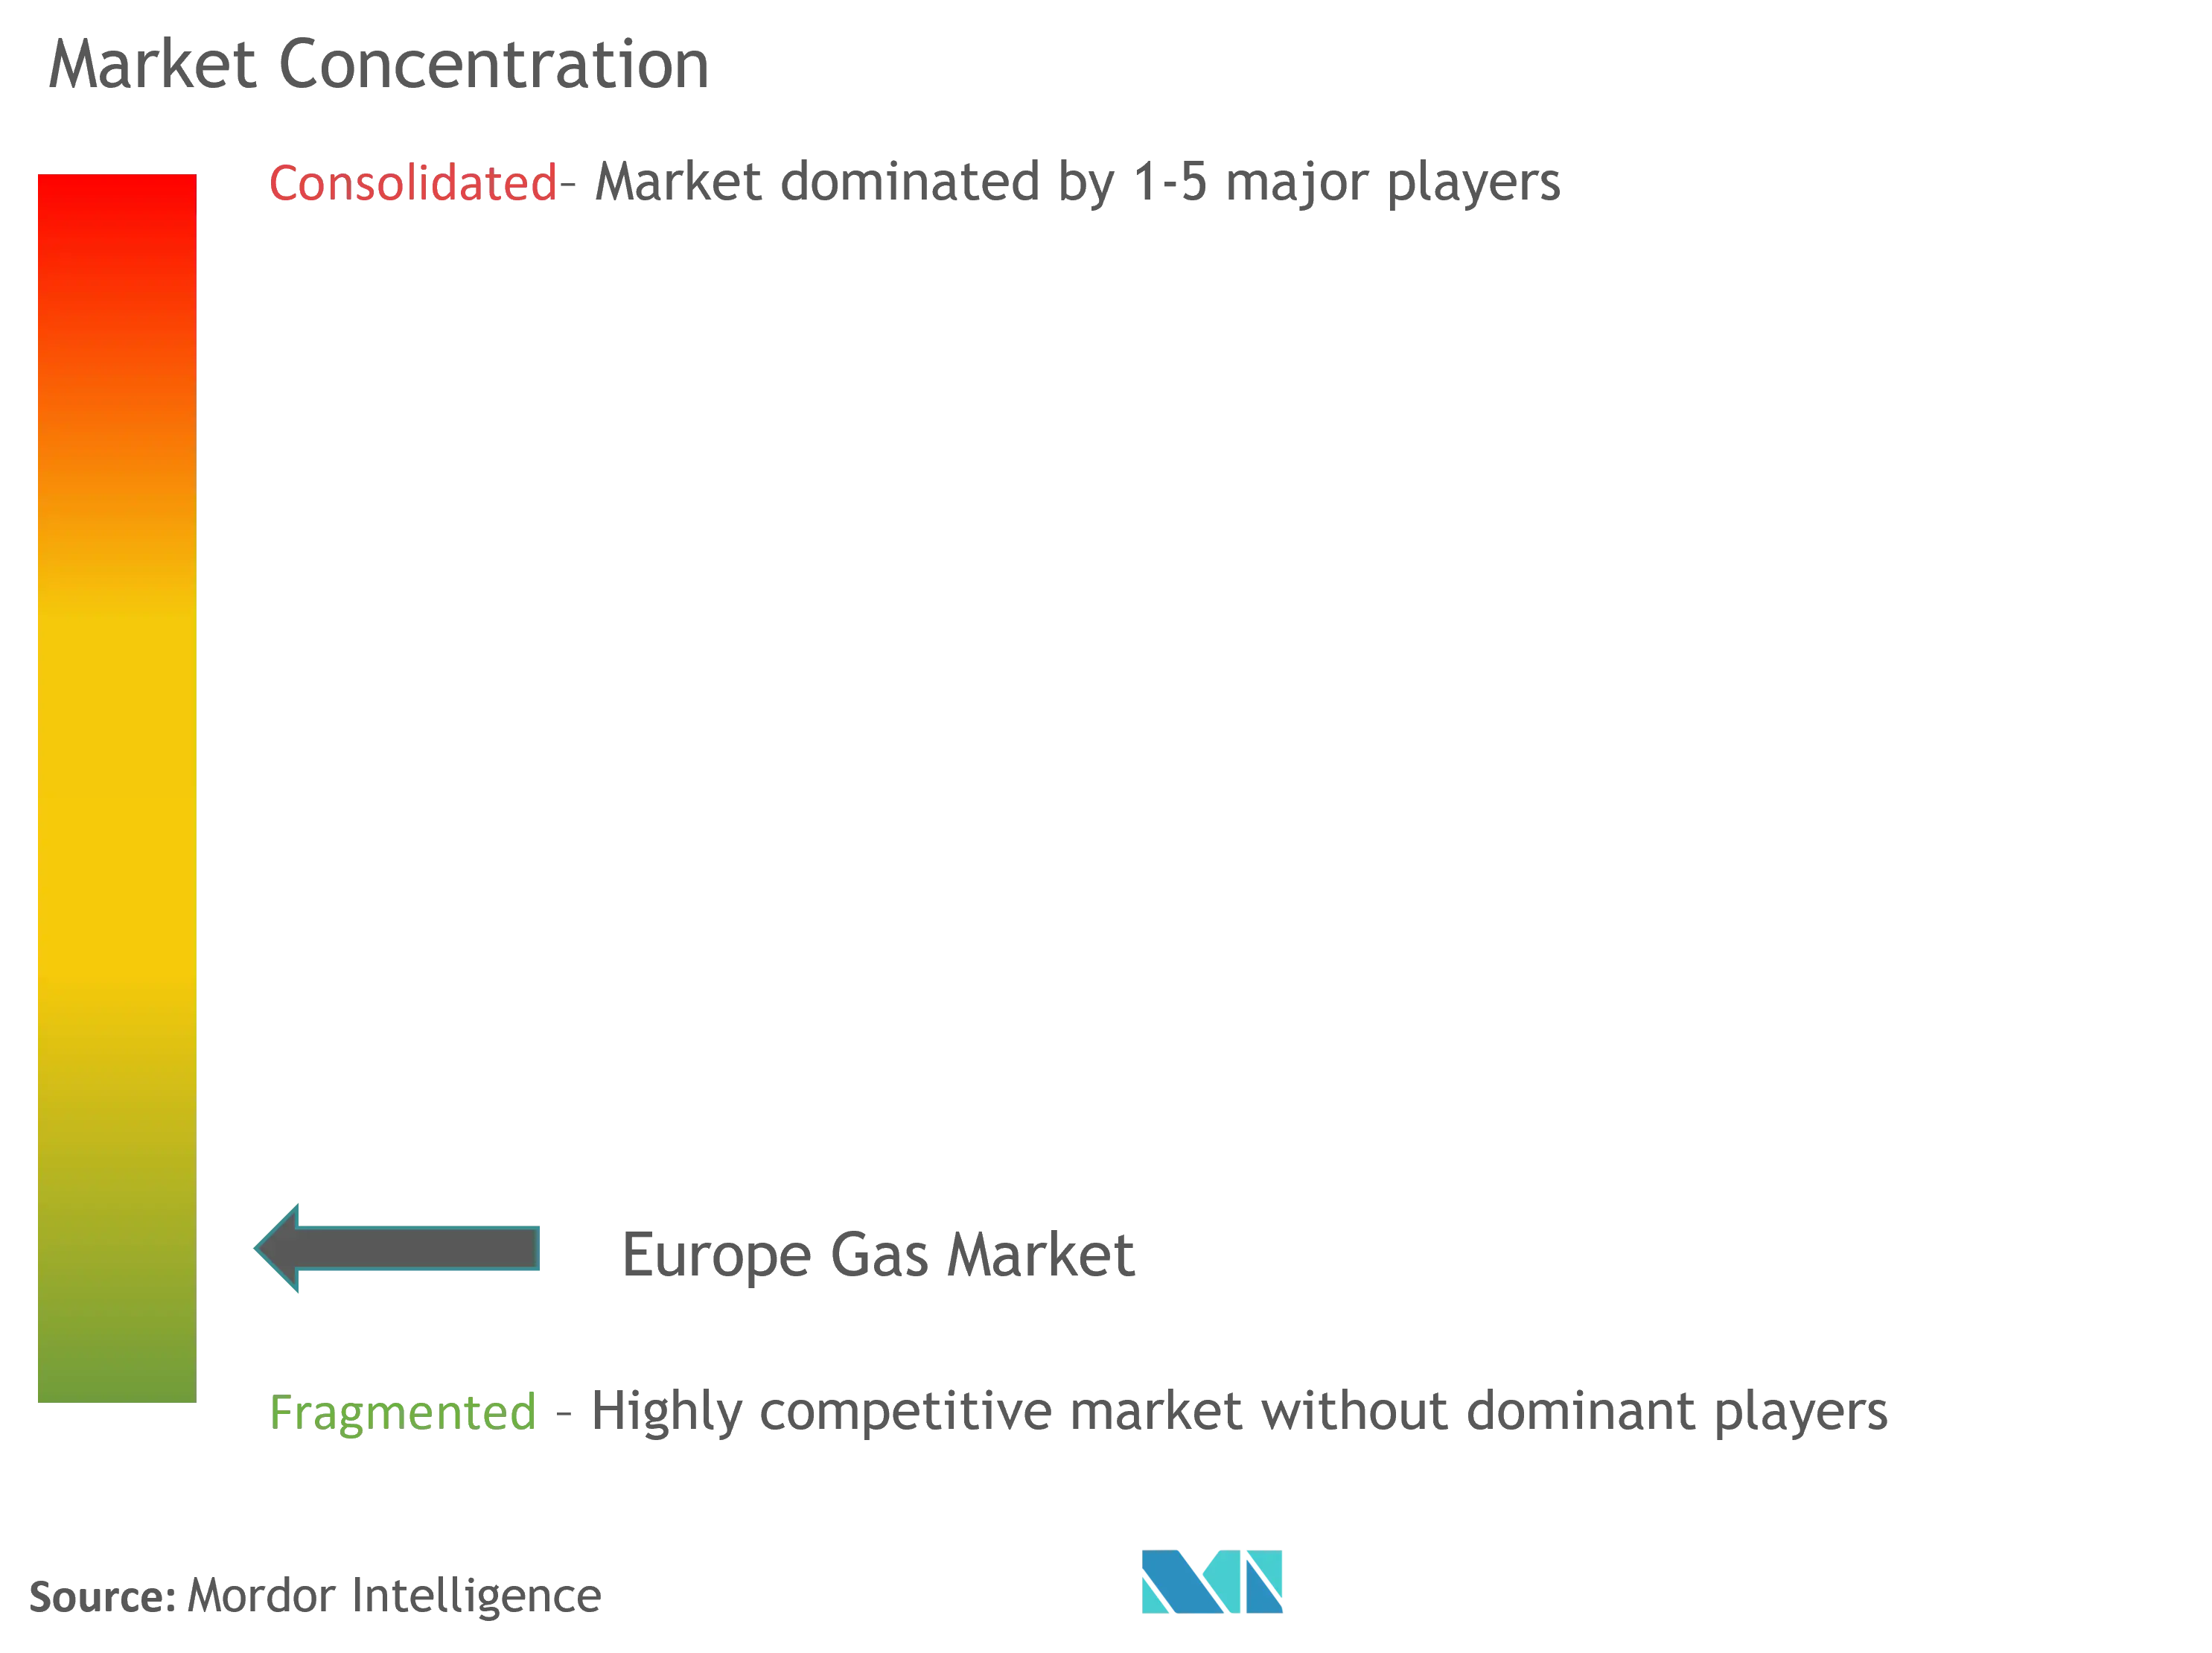 Europe Gas Market Concentration